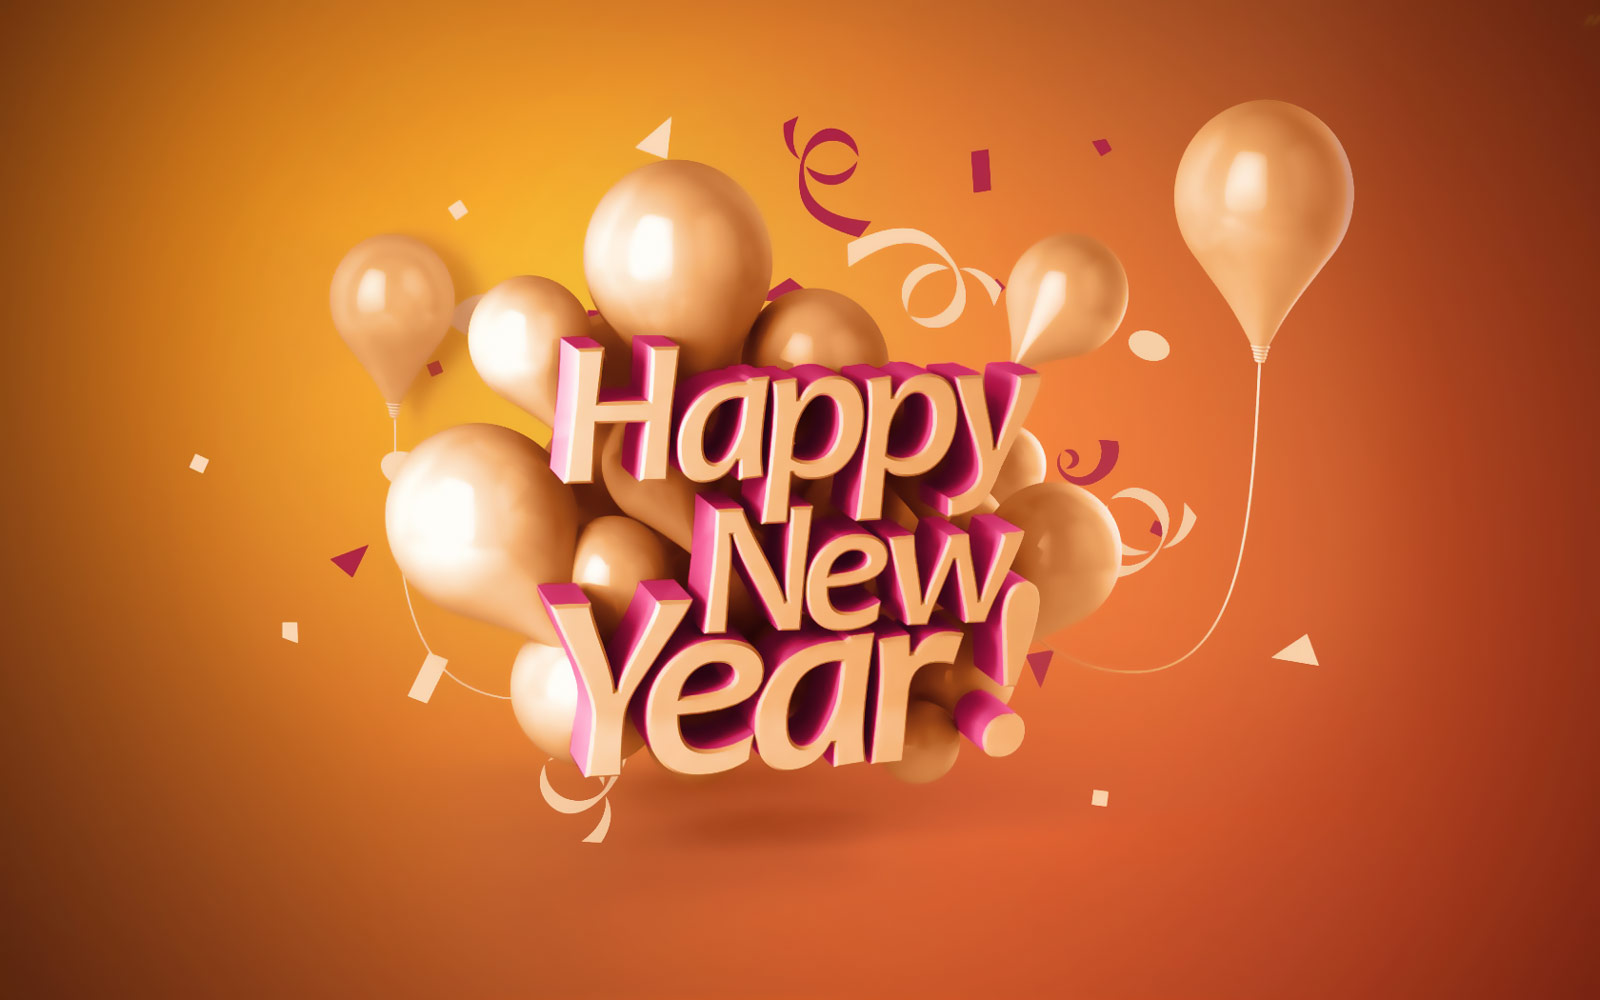 Happy New Year 2016 Wishes and Messages/ SMS/ Greetings